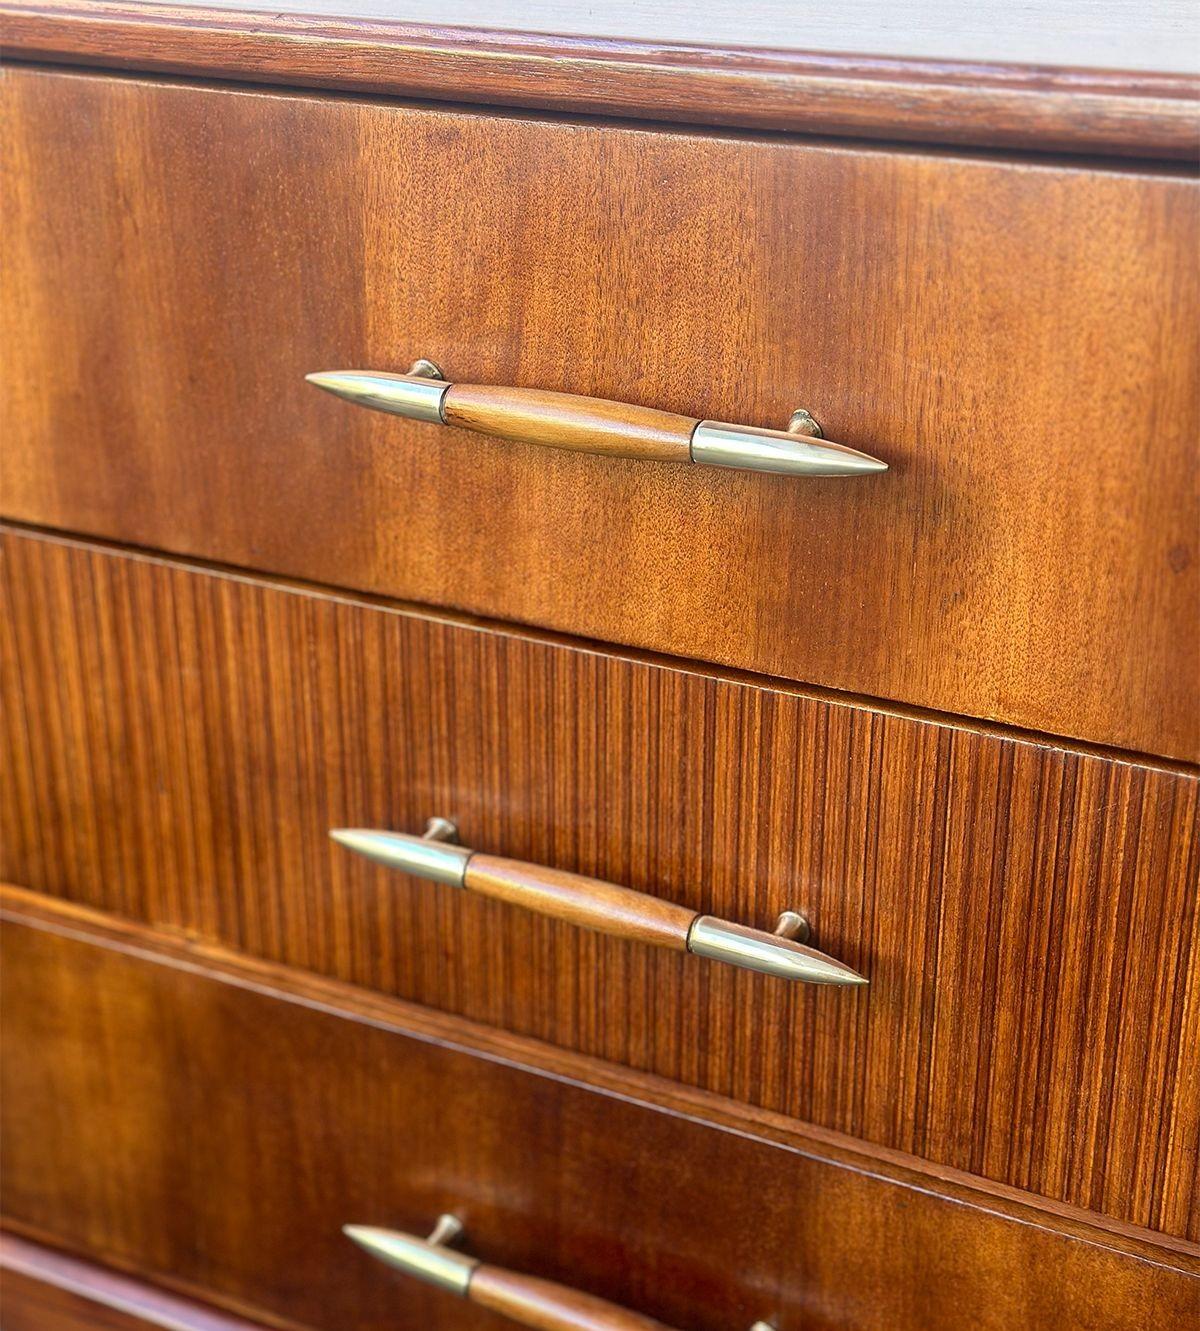 Mid-20th Century Vintage Italian Mid-Century Dresser with Brass Accents, c. 1950's For Sale